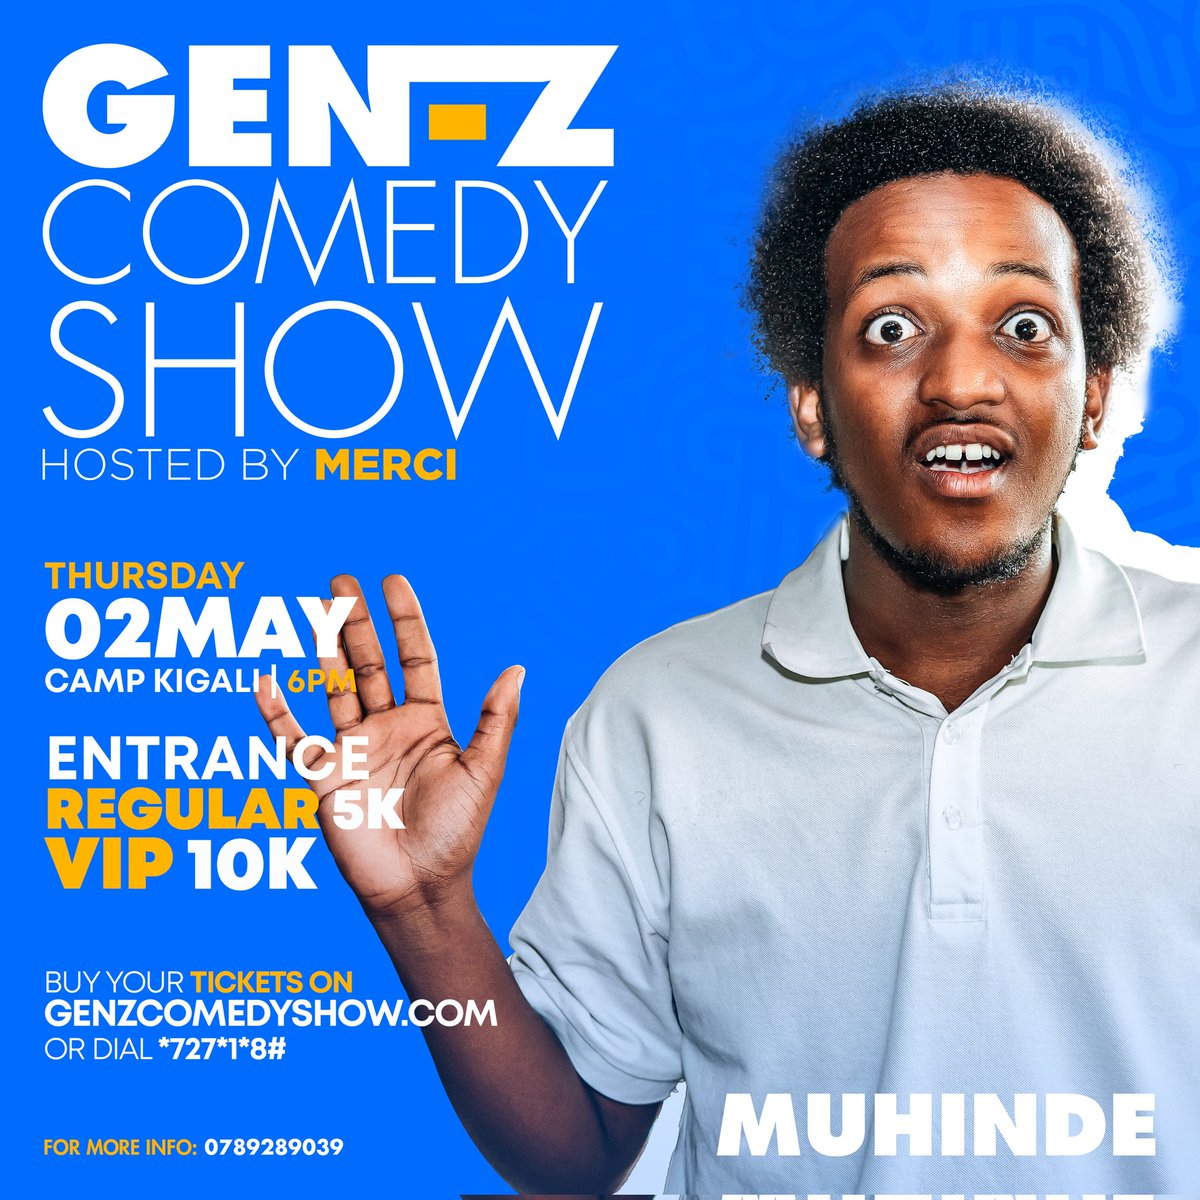 ⚠️⚠️ Ladies and Gentlemen ⚠️⚠️
@muhindee is coming back live in #genzcomedyshow
THURSDAY 02/05/2024
Sura genzcomedyshow.com maze wigurire ticket yawe
cg ukande *727*1*8# 

📍Venue: Camp KIGALI (KCEV) 6PM ​
Regular ni 5k na 10k VIP
Make sure you book the ticket before.